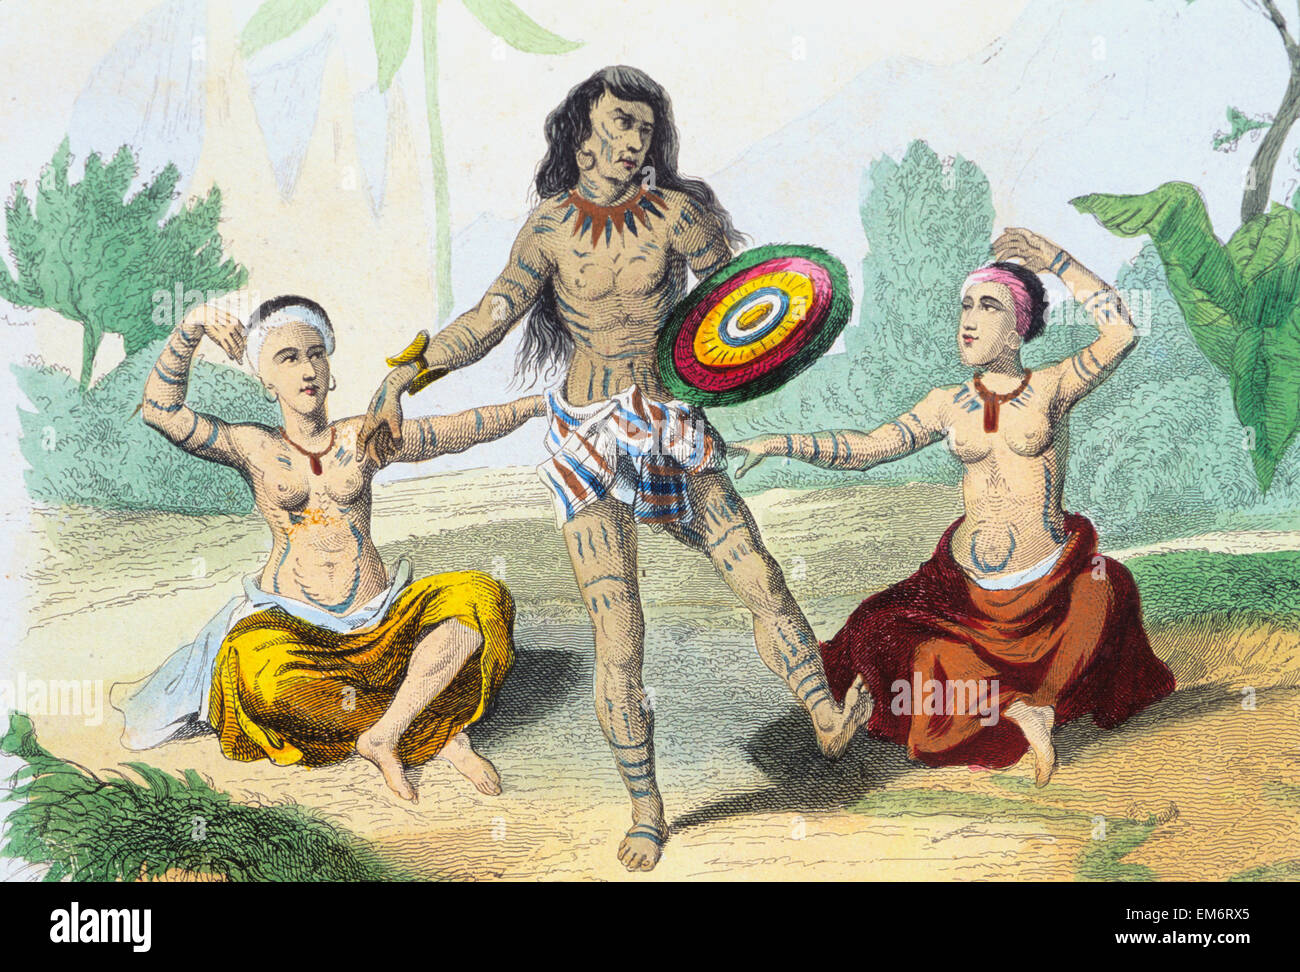 C.1850, Hawaiian Hula Dancers Performing In Costume And Instruments. Stock Photo